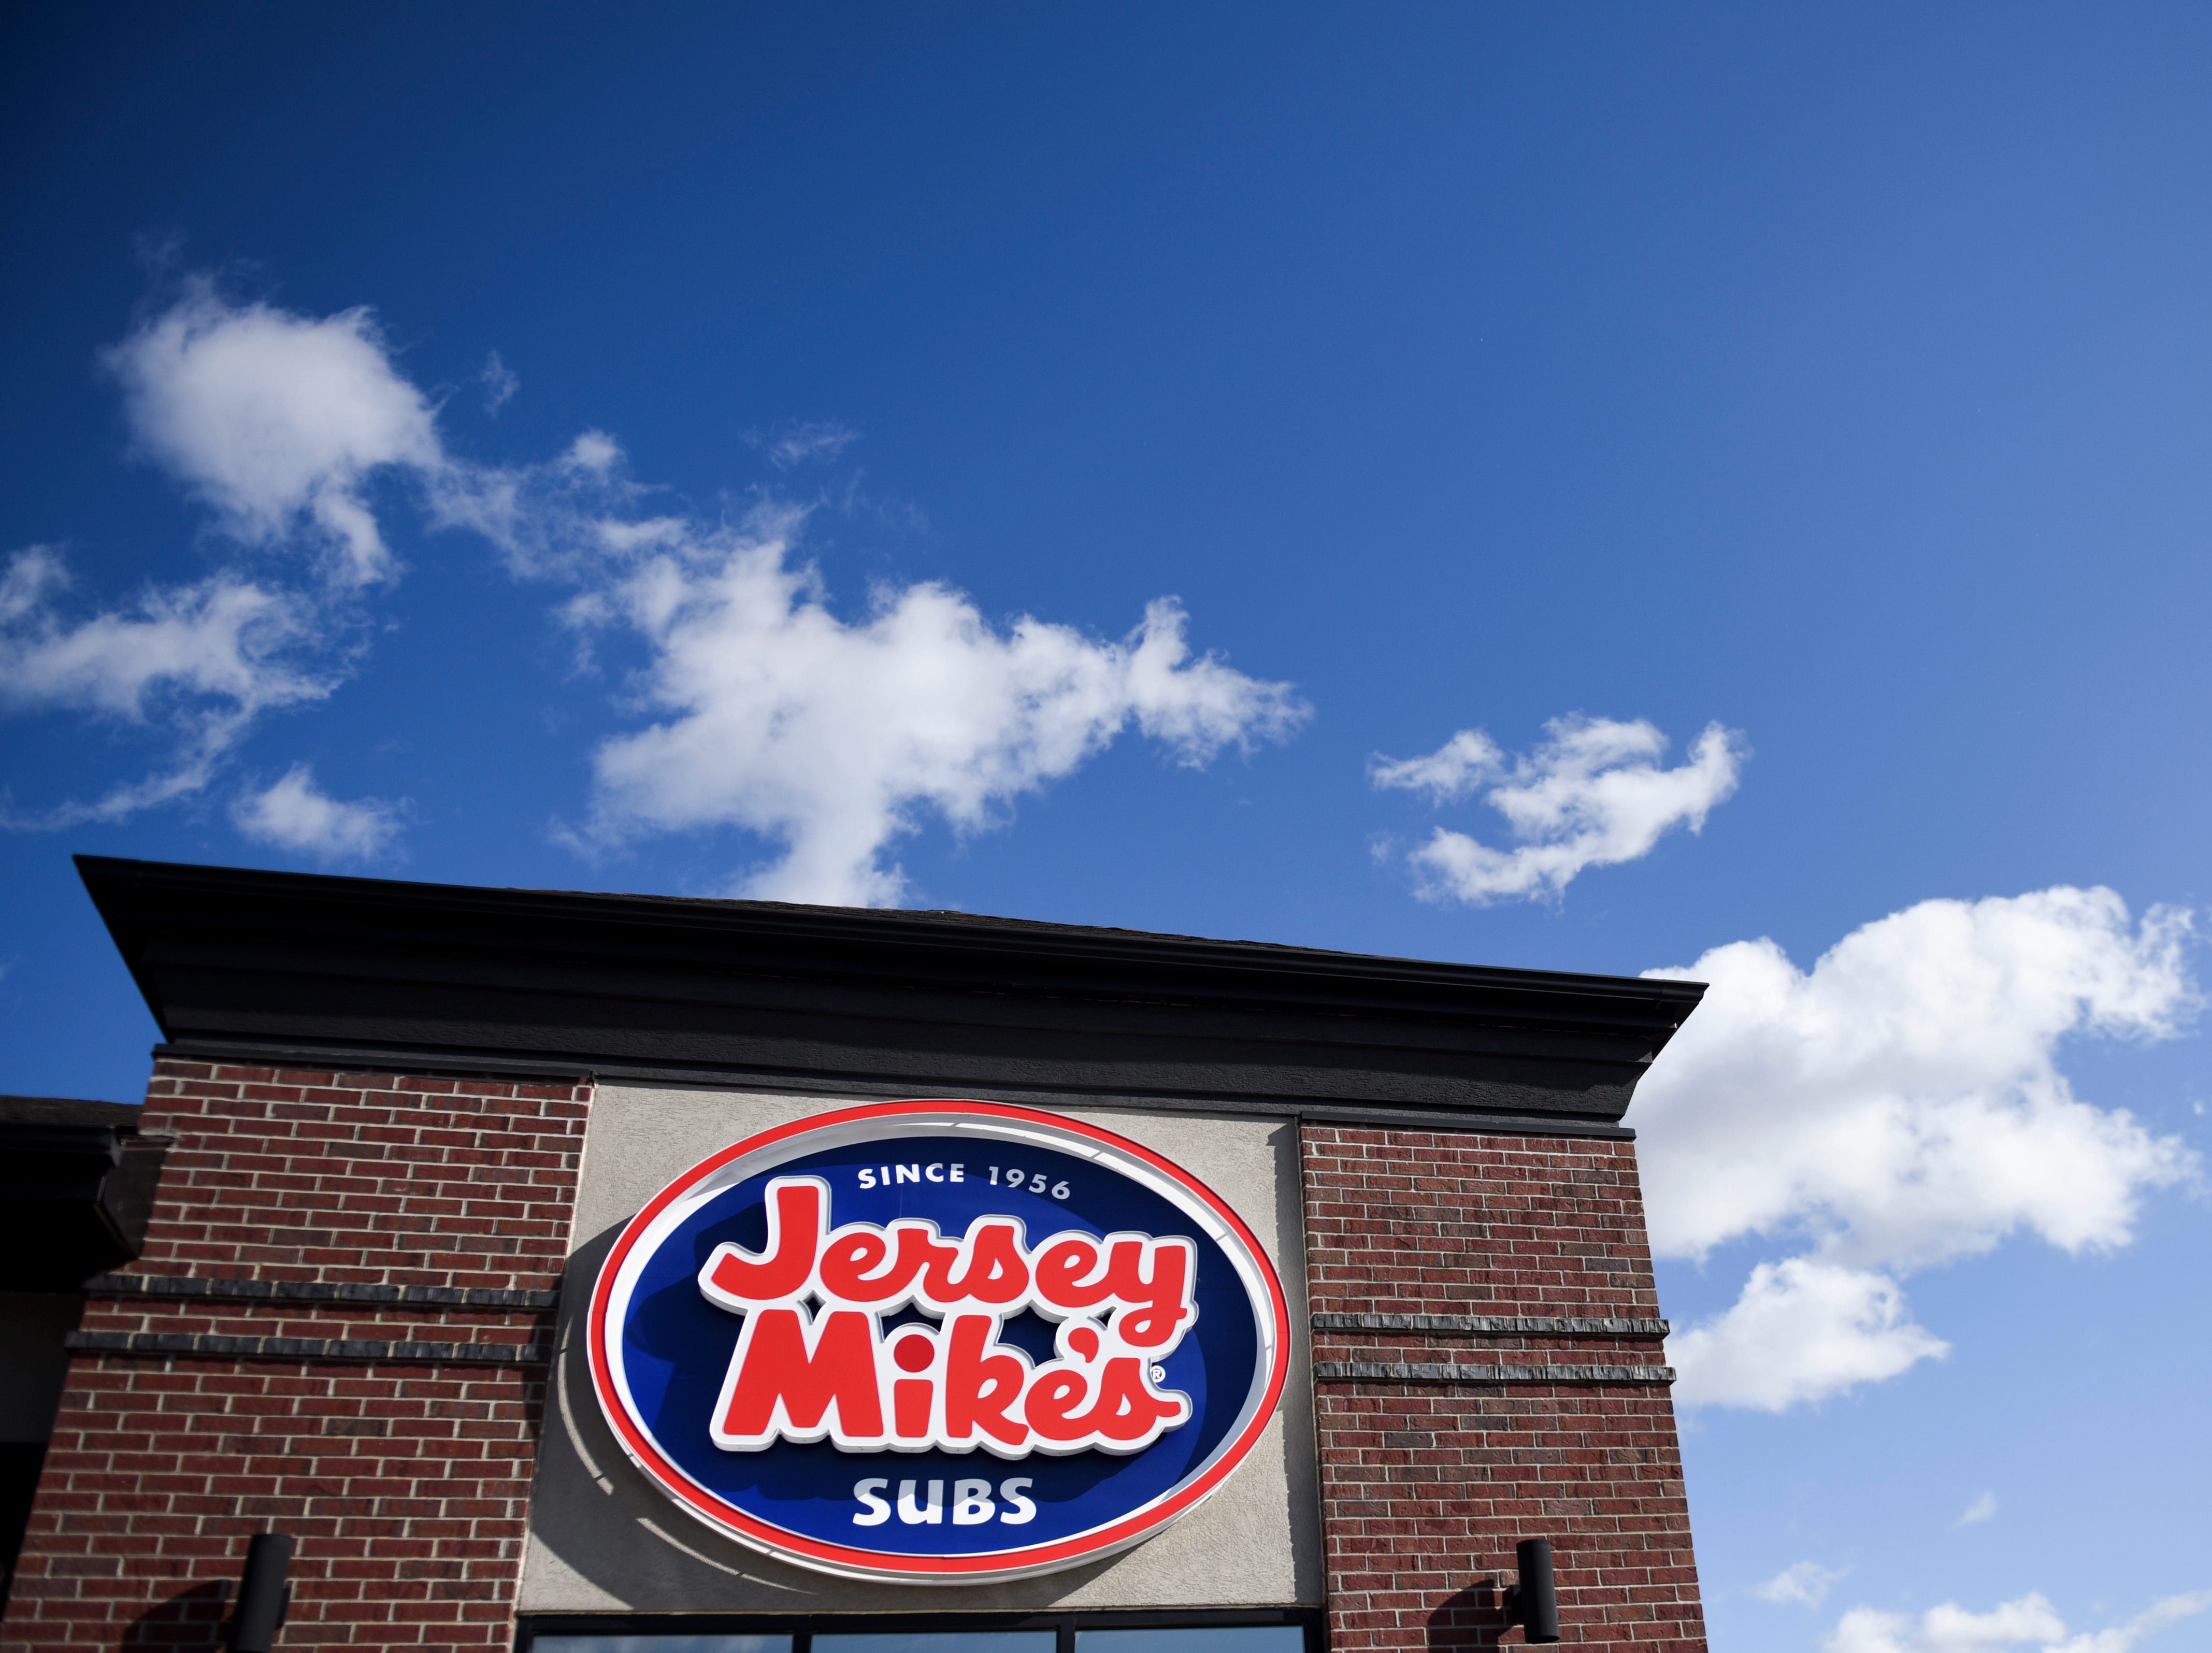 jersey mike's corporate headquarters